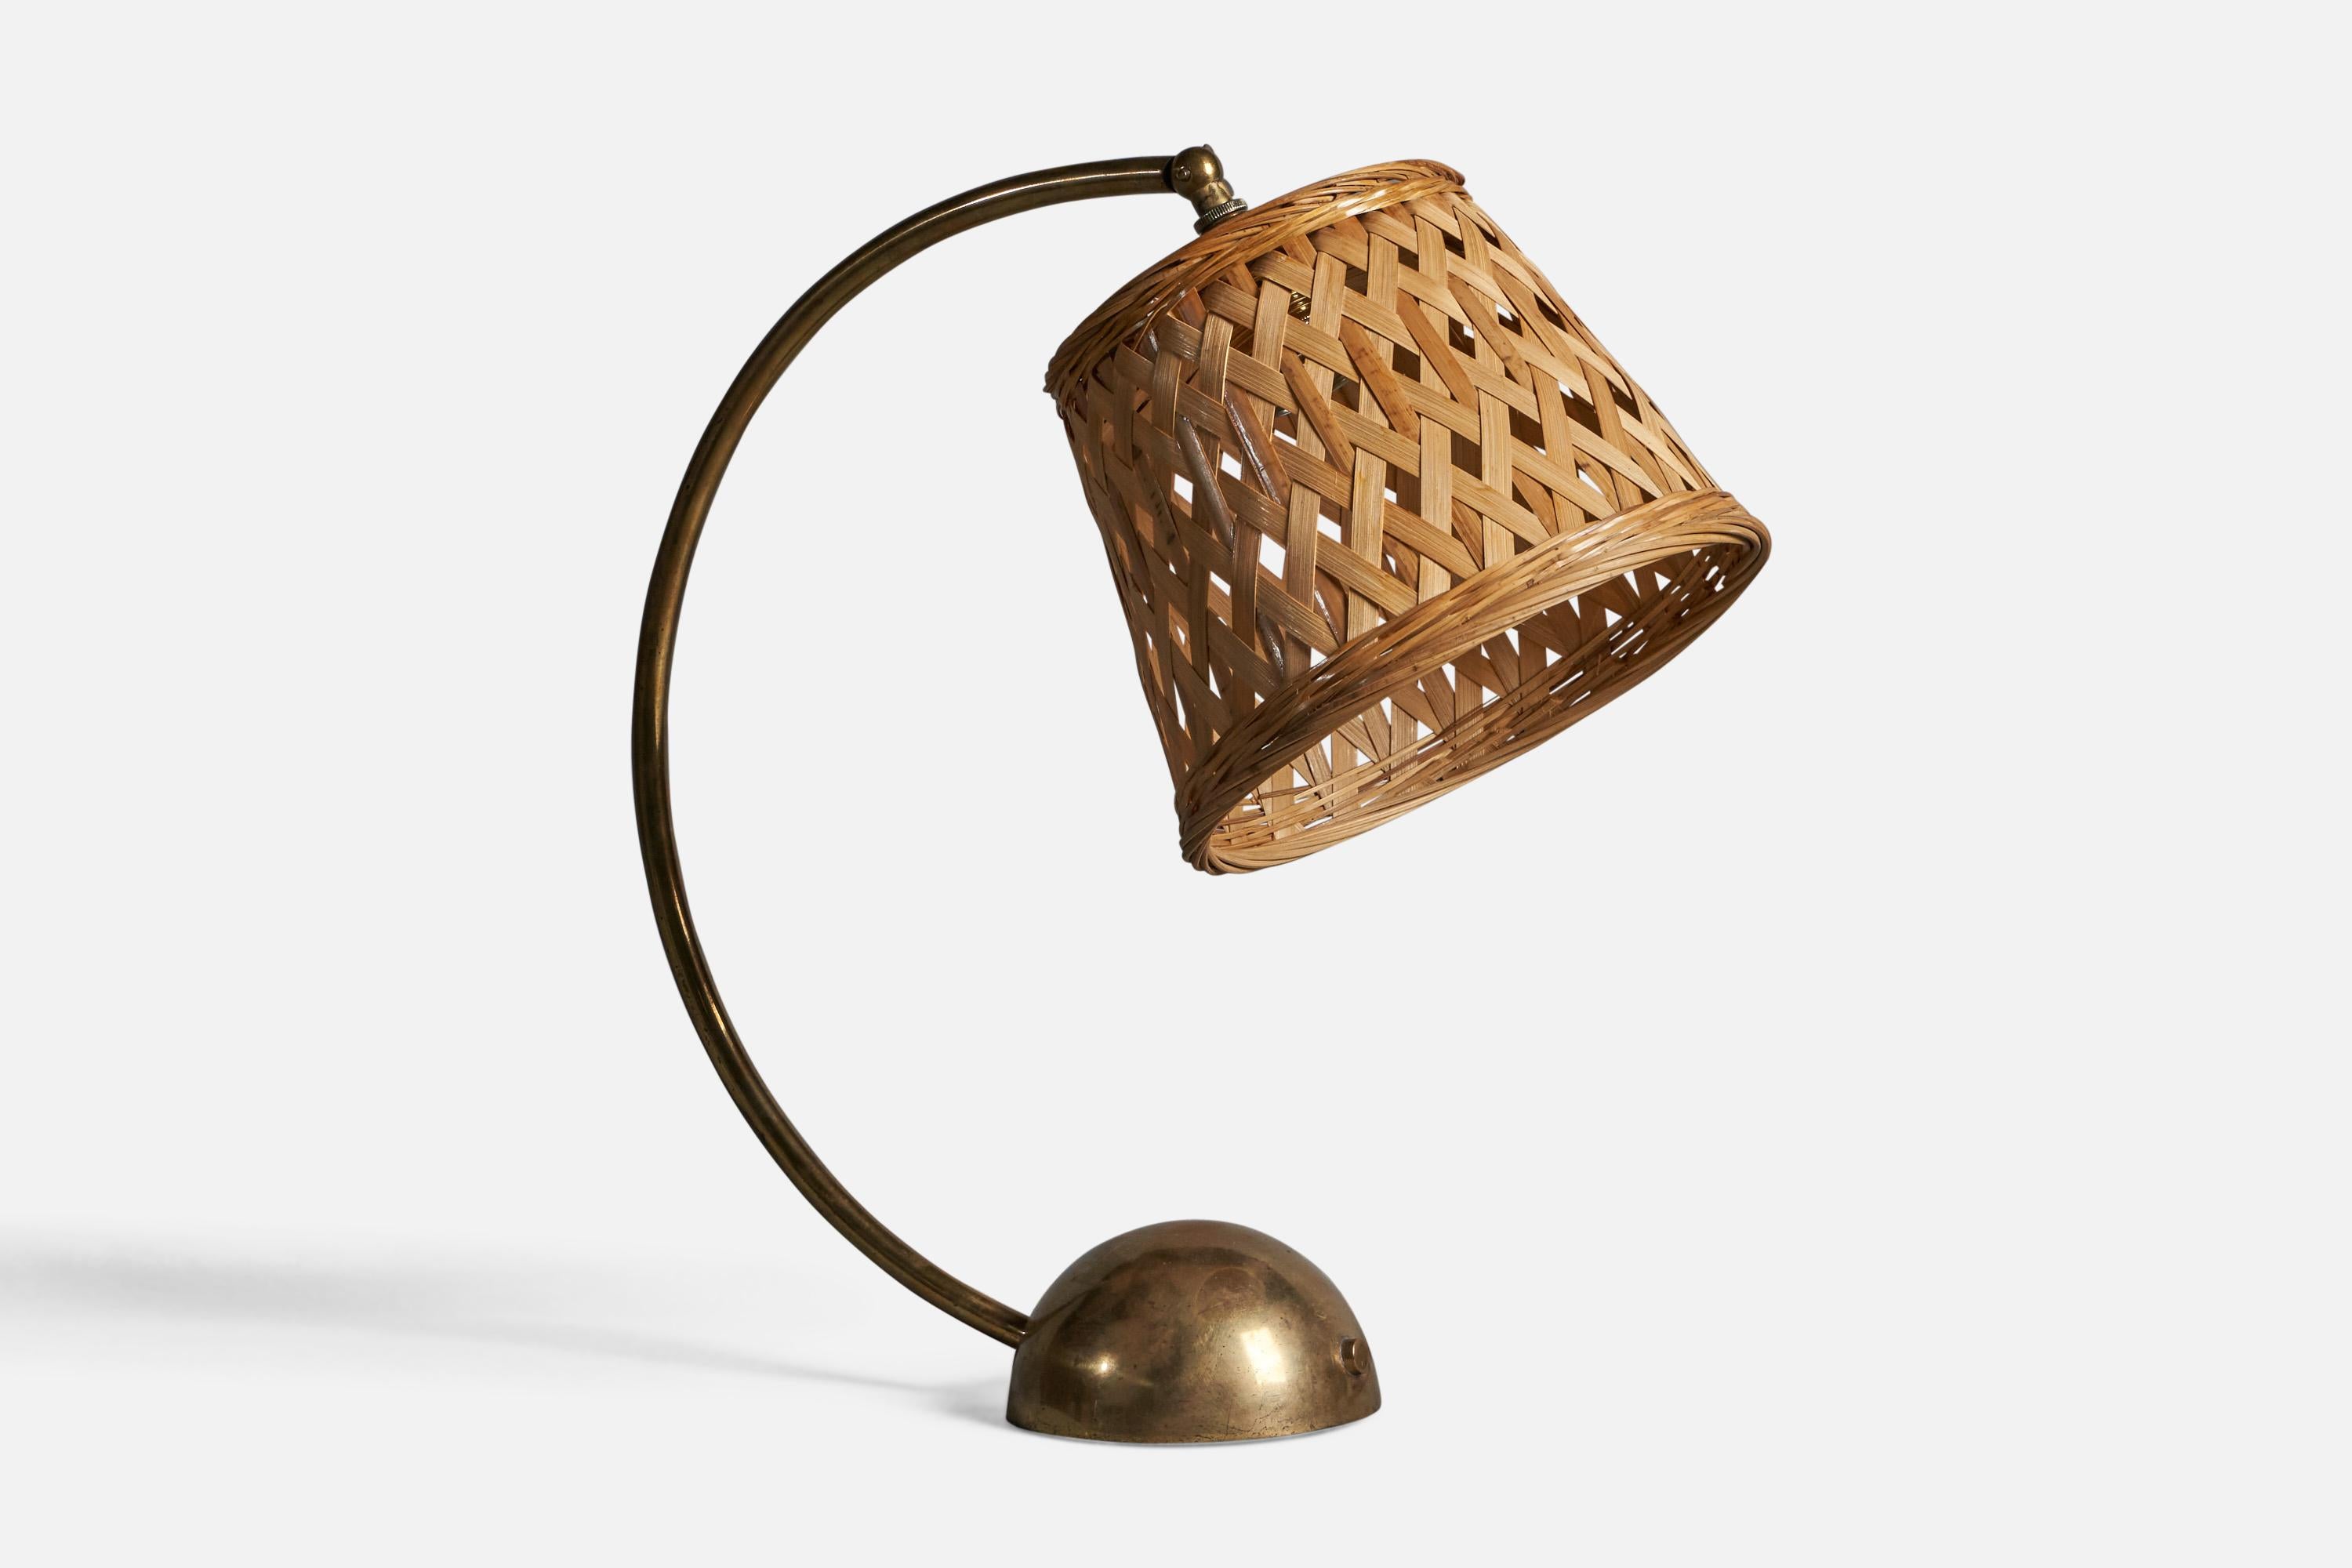 A brass and rattan table lamp designed by Pitt Müller, Germany, 1950s.

Overall Dimensions (inches): 16